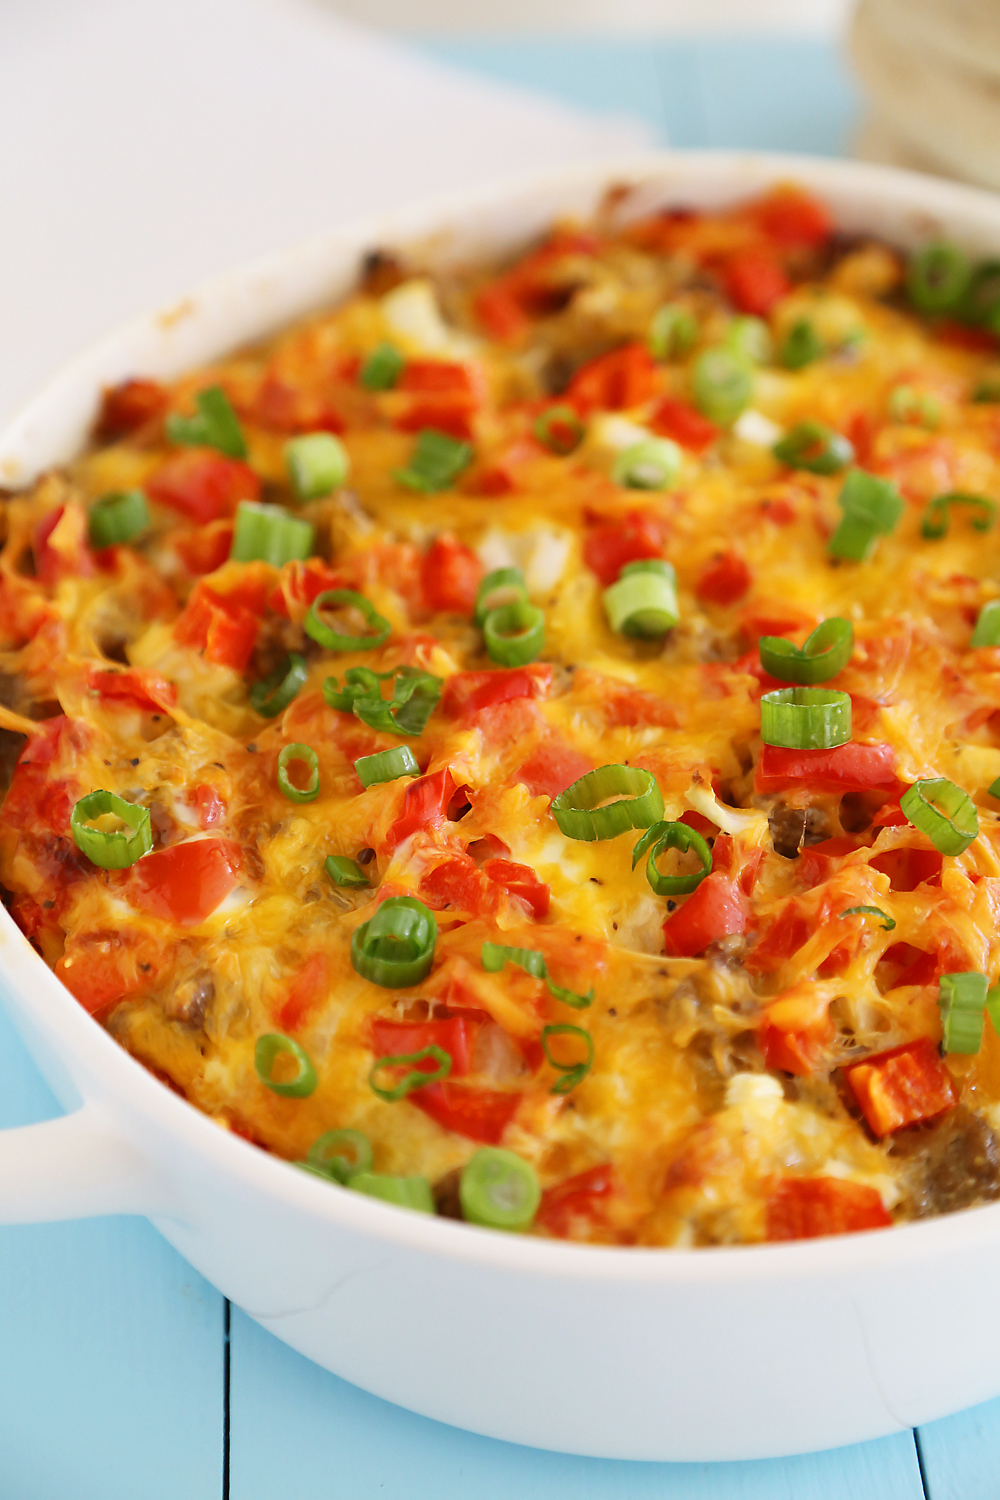 English Muffin Sausage, Egg and Cheese Breakfast Casserole – So delicious and easy! Topped with salty sausage, scrambled eggs and cheddar. thecomfortofcooking.com